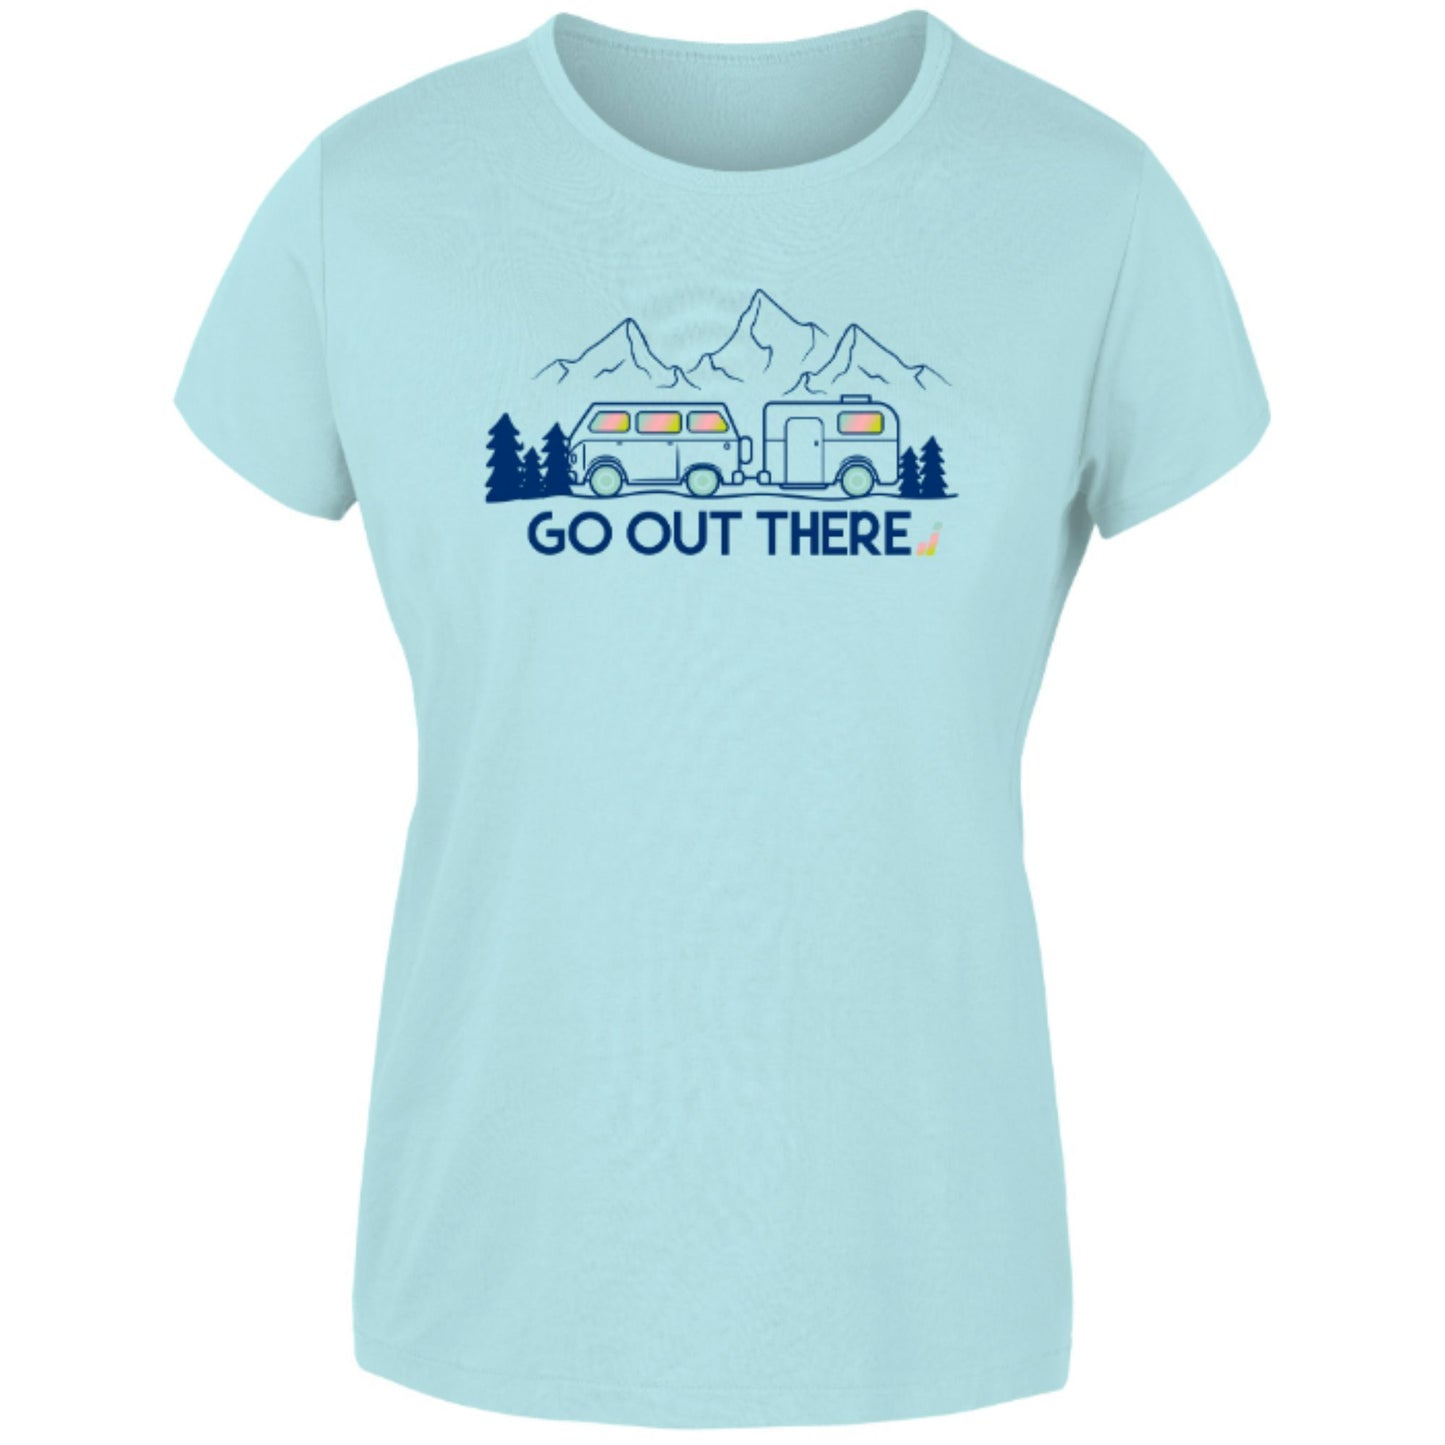 Camiseta manga corta mujer Joluvi GO OUT THERE (3 COLORES)